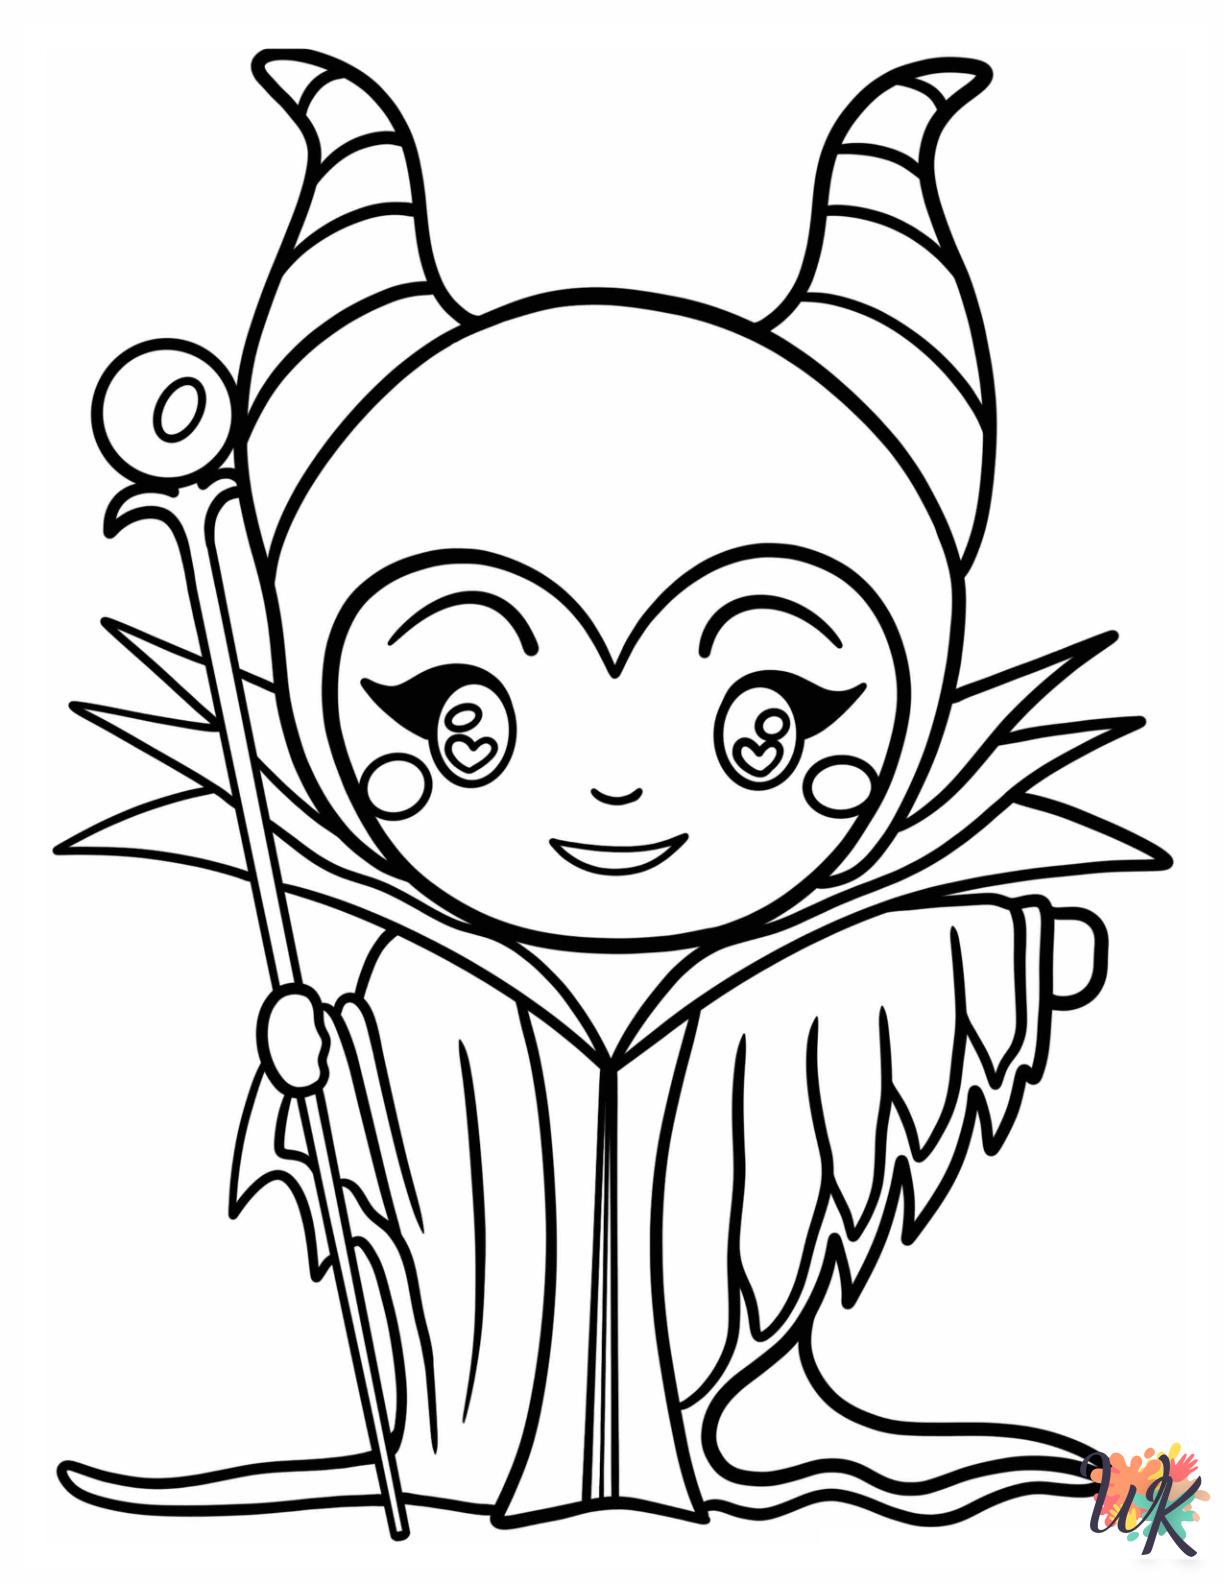 kawaii cute Maleficent coloring pages